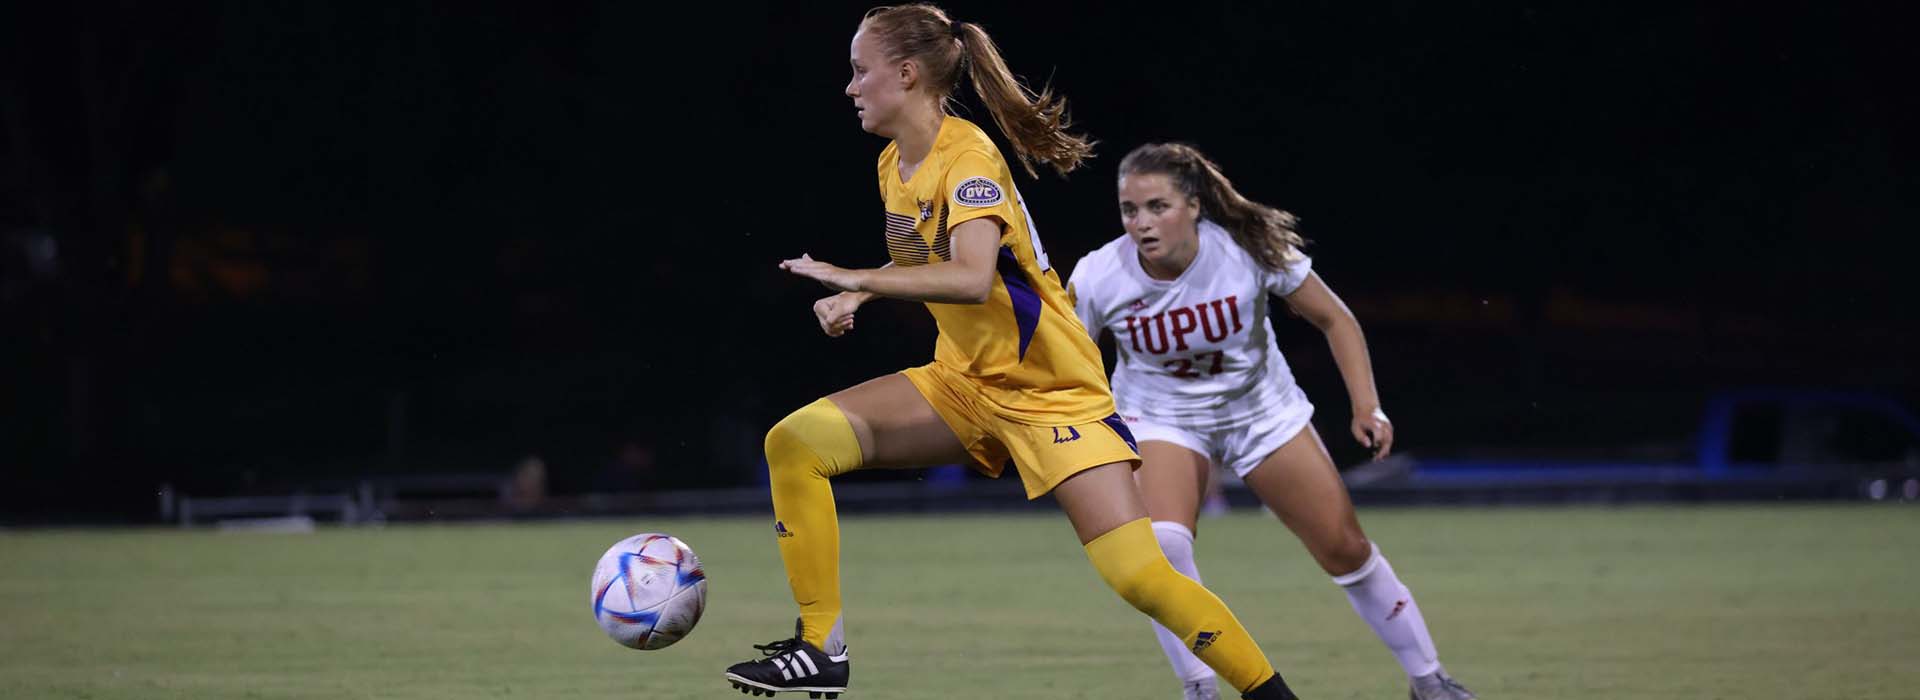 Strong second half leads Lipscomb to 4-0 win over Tech